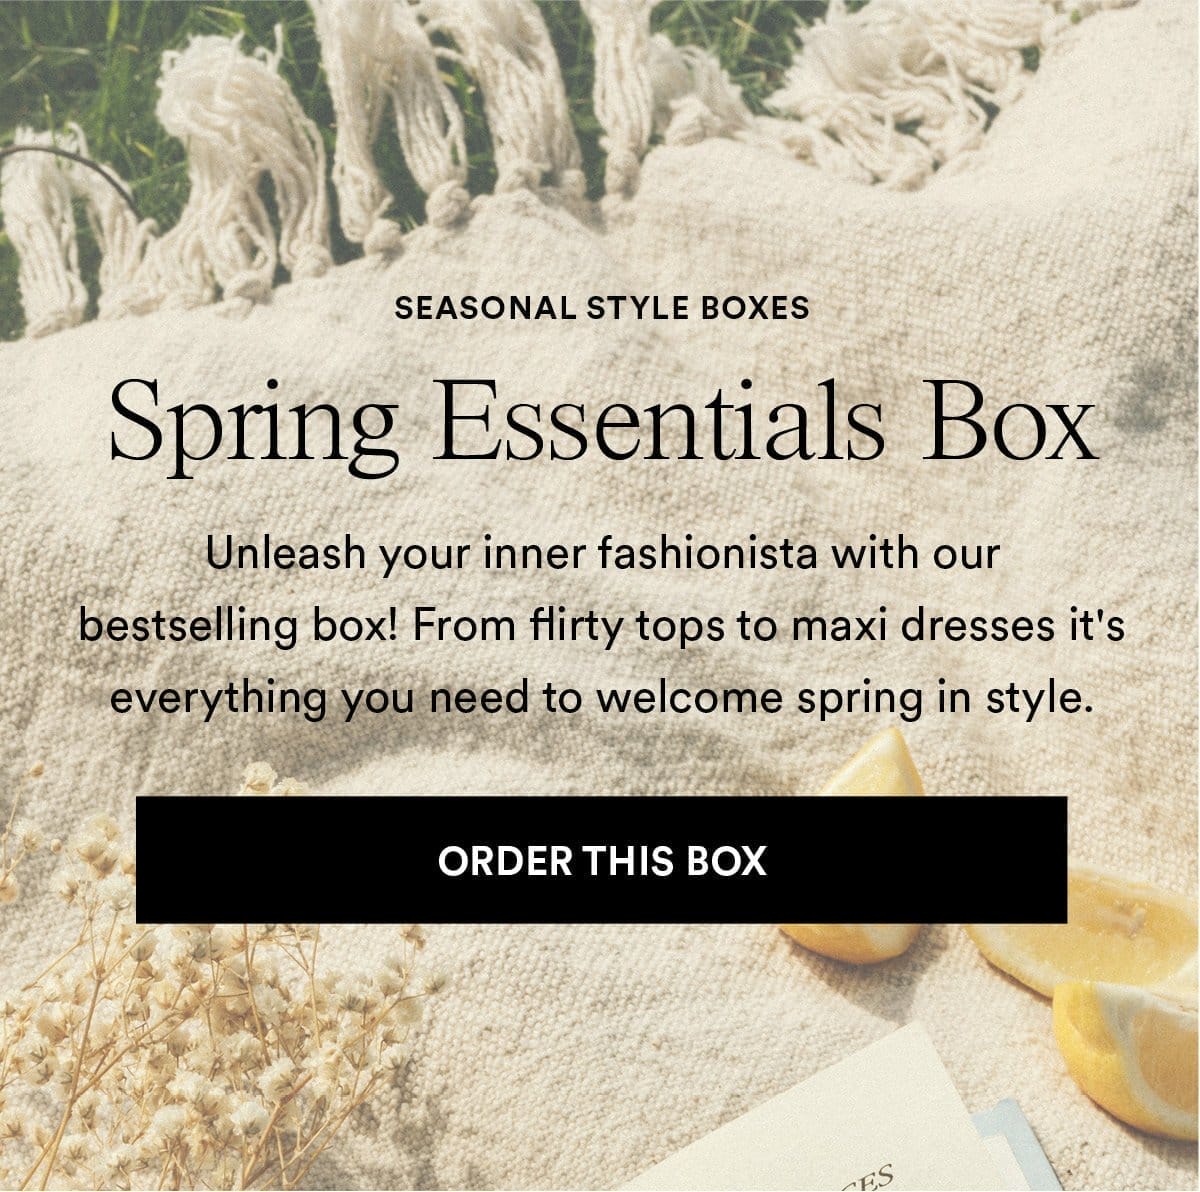 Spring Essential Box. Unleash your inner fashionista with our bestselling box! From flirty tops to maxi dresses it's everything you need to welcome spring in style.